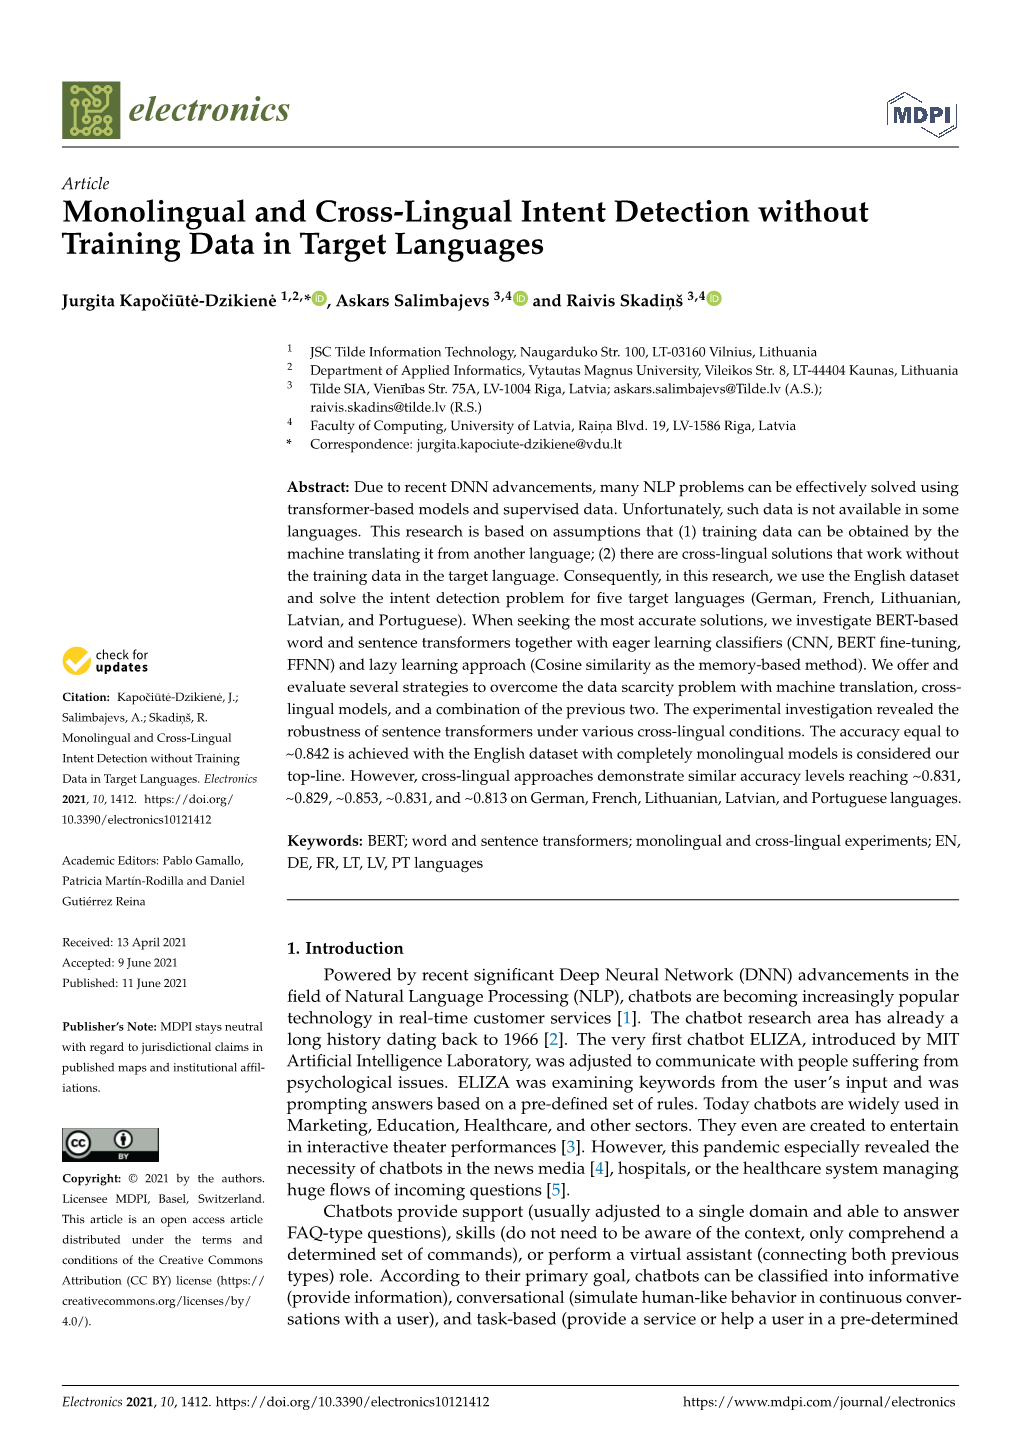 Monolingual and Cross-Lingual Intent Detection Without Training Data in Target Languages